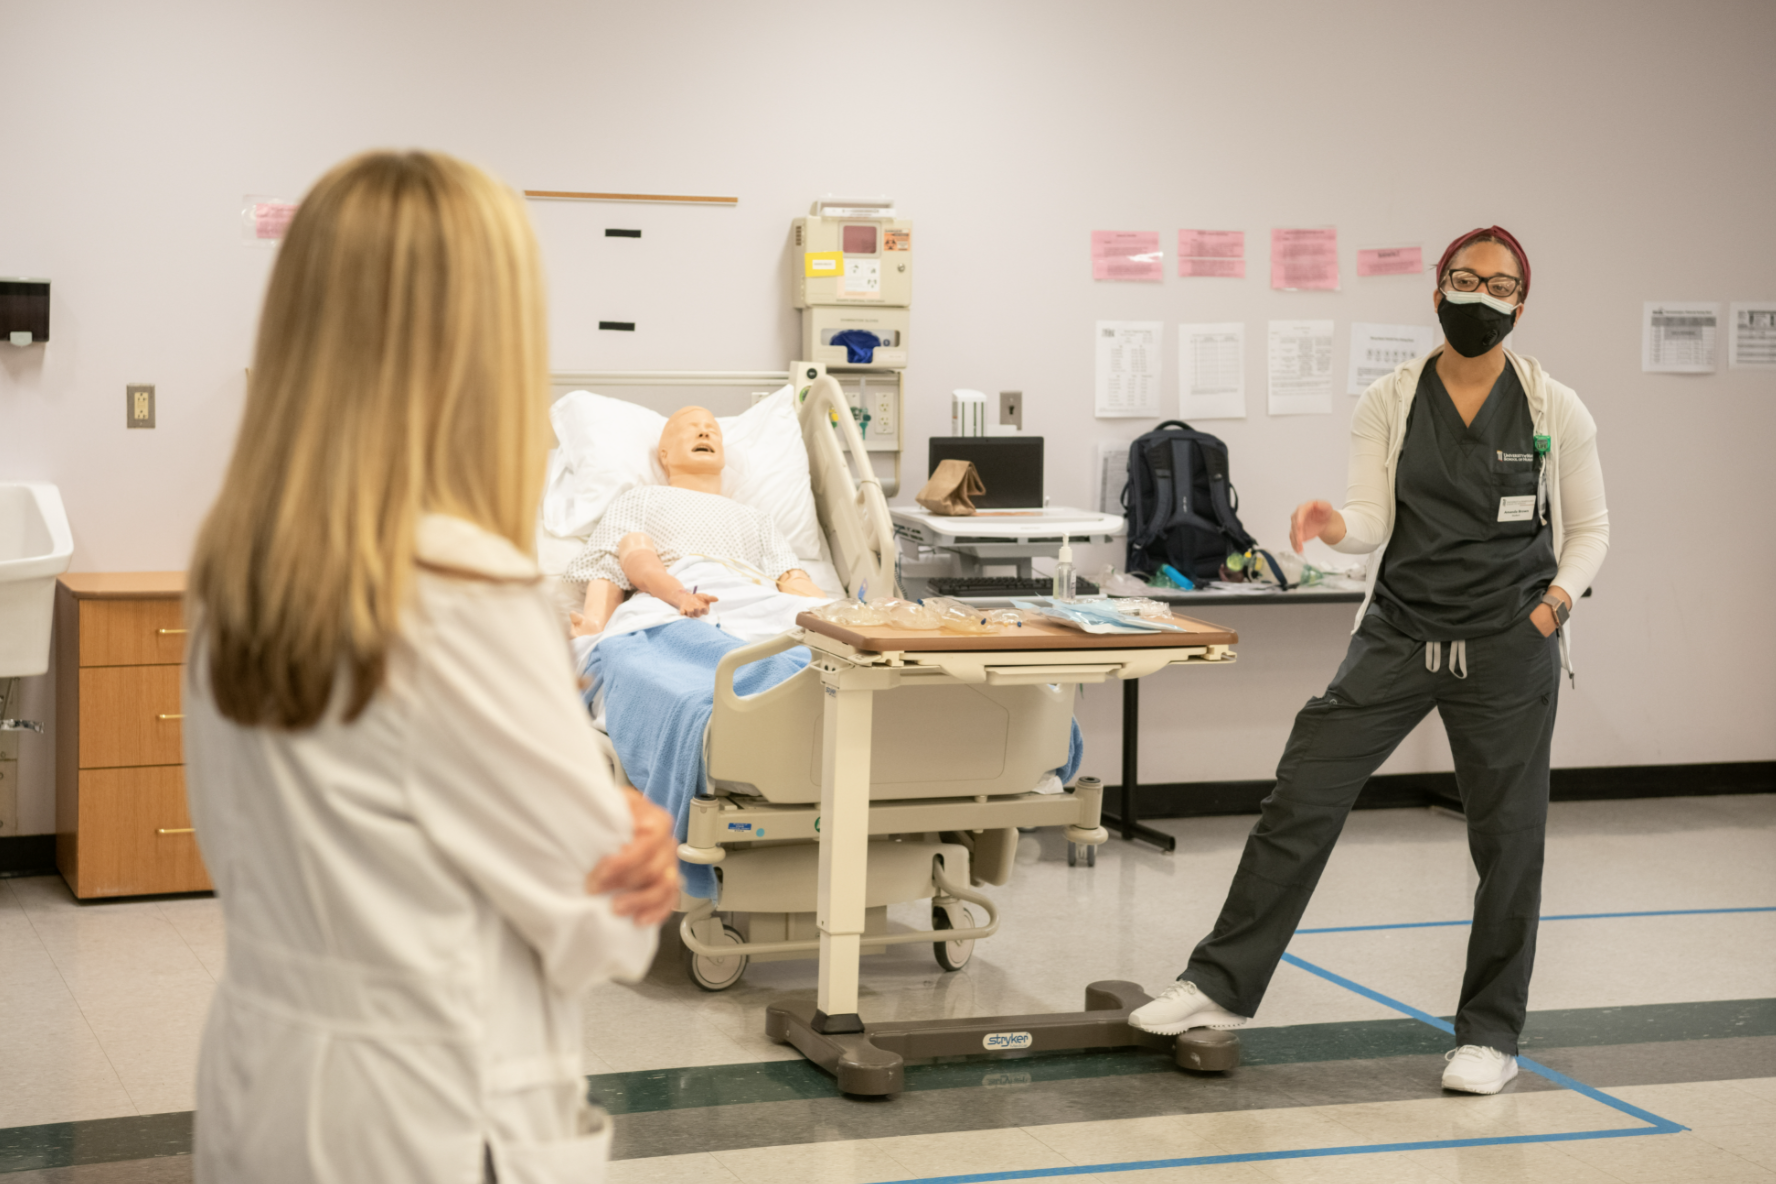 student and instructor in clinical simulation lab wearing masks